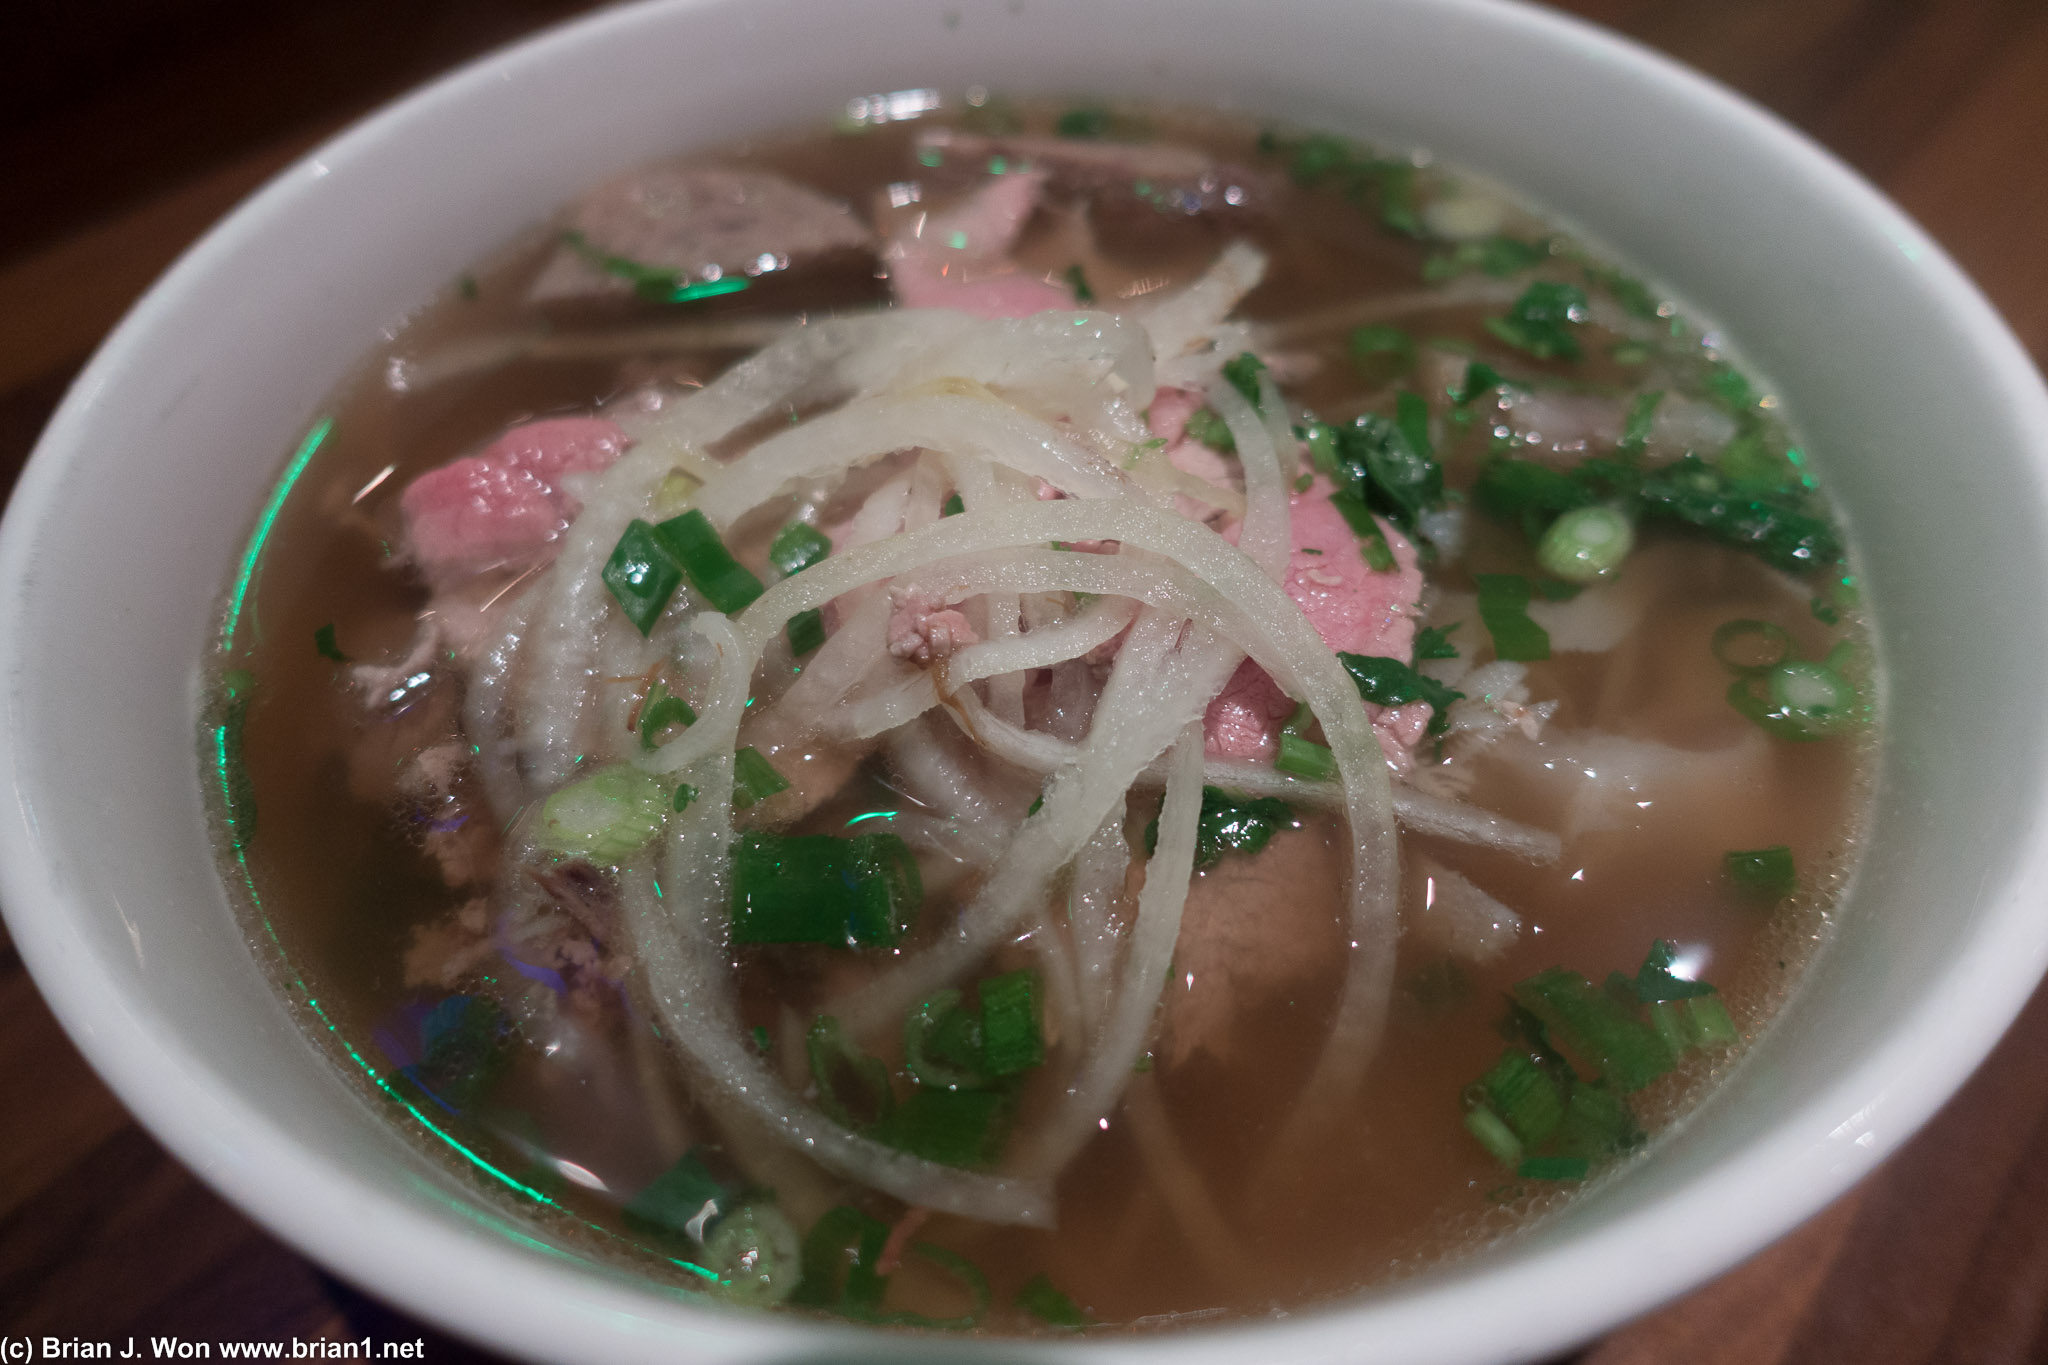 Combo pho wasn't bad for westside pho, but that still meant it wasn't very good.